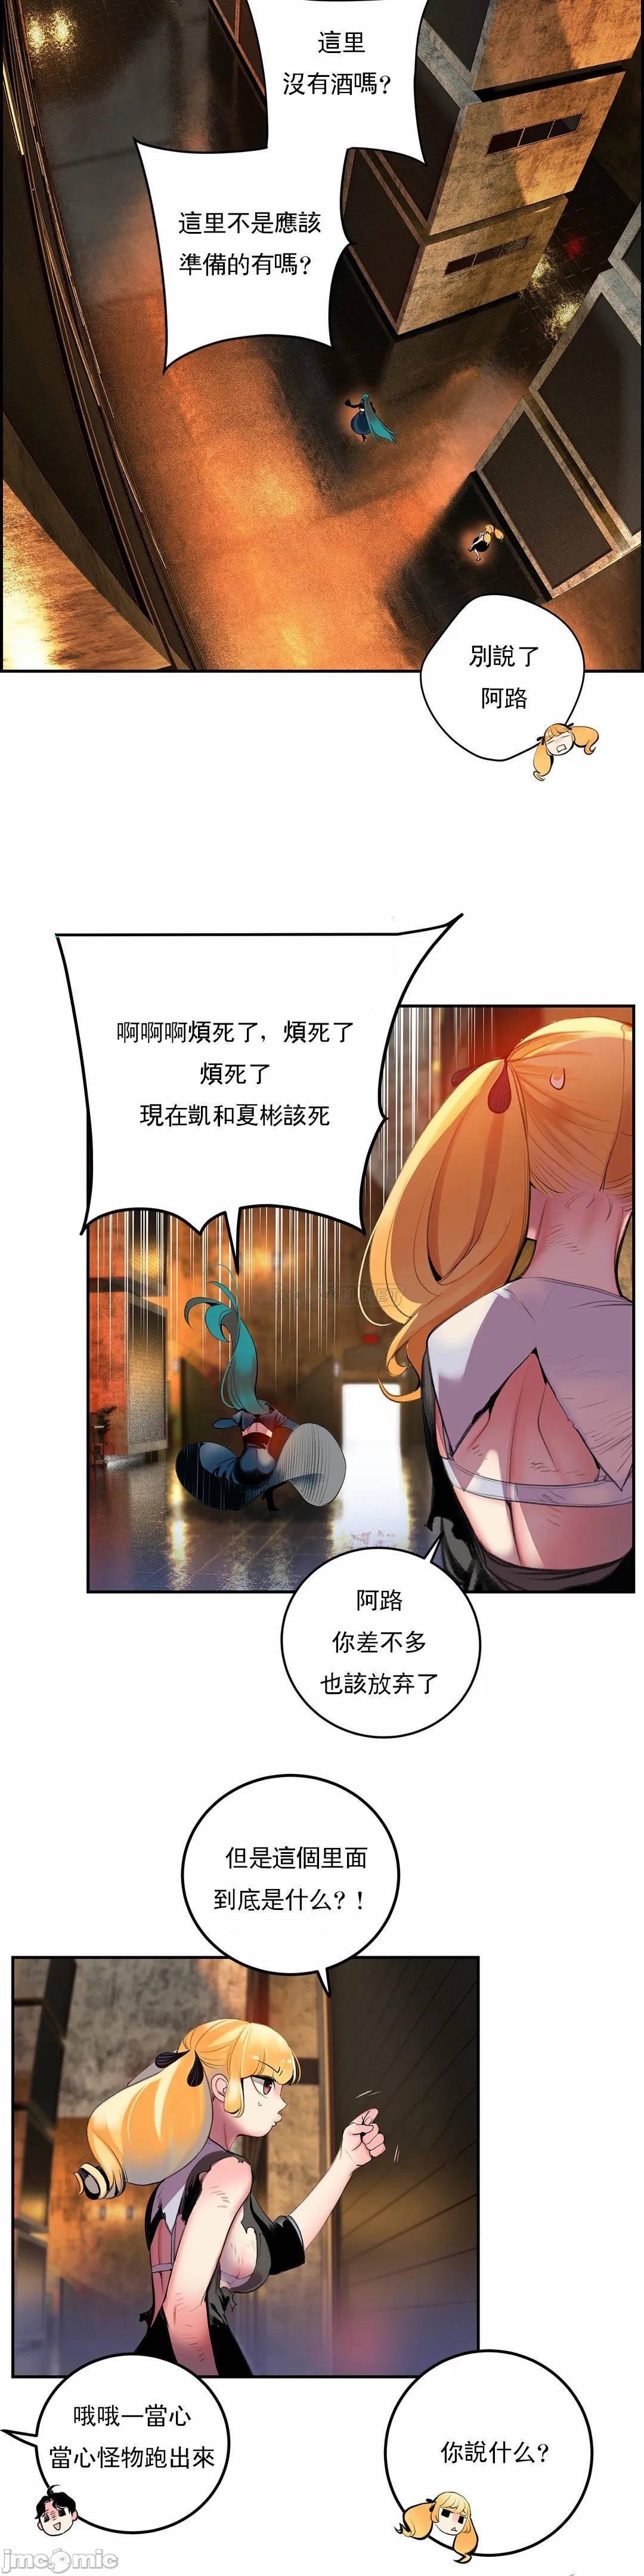 [Juder] Lilith`s Cord (第二季) Ch.77-93 end [Chinese] 383